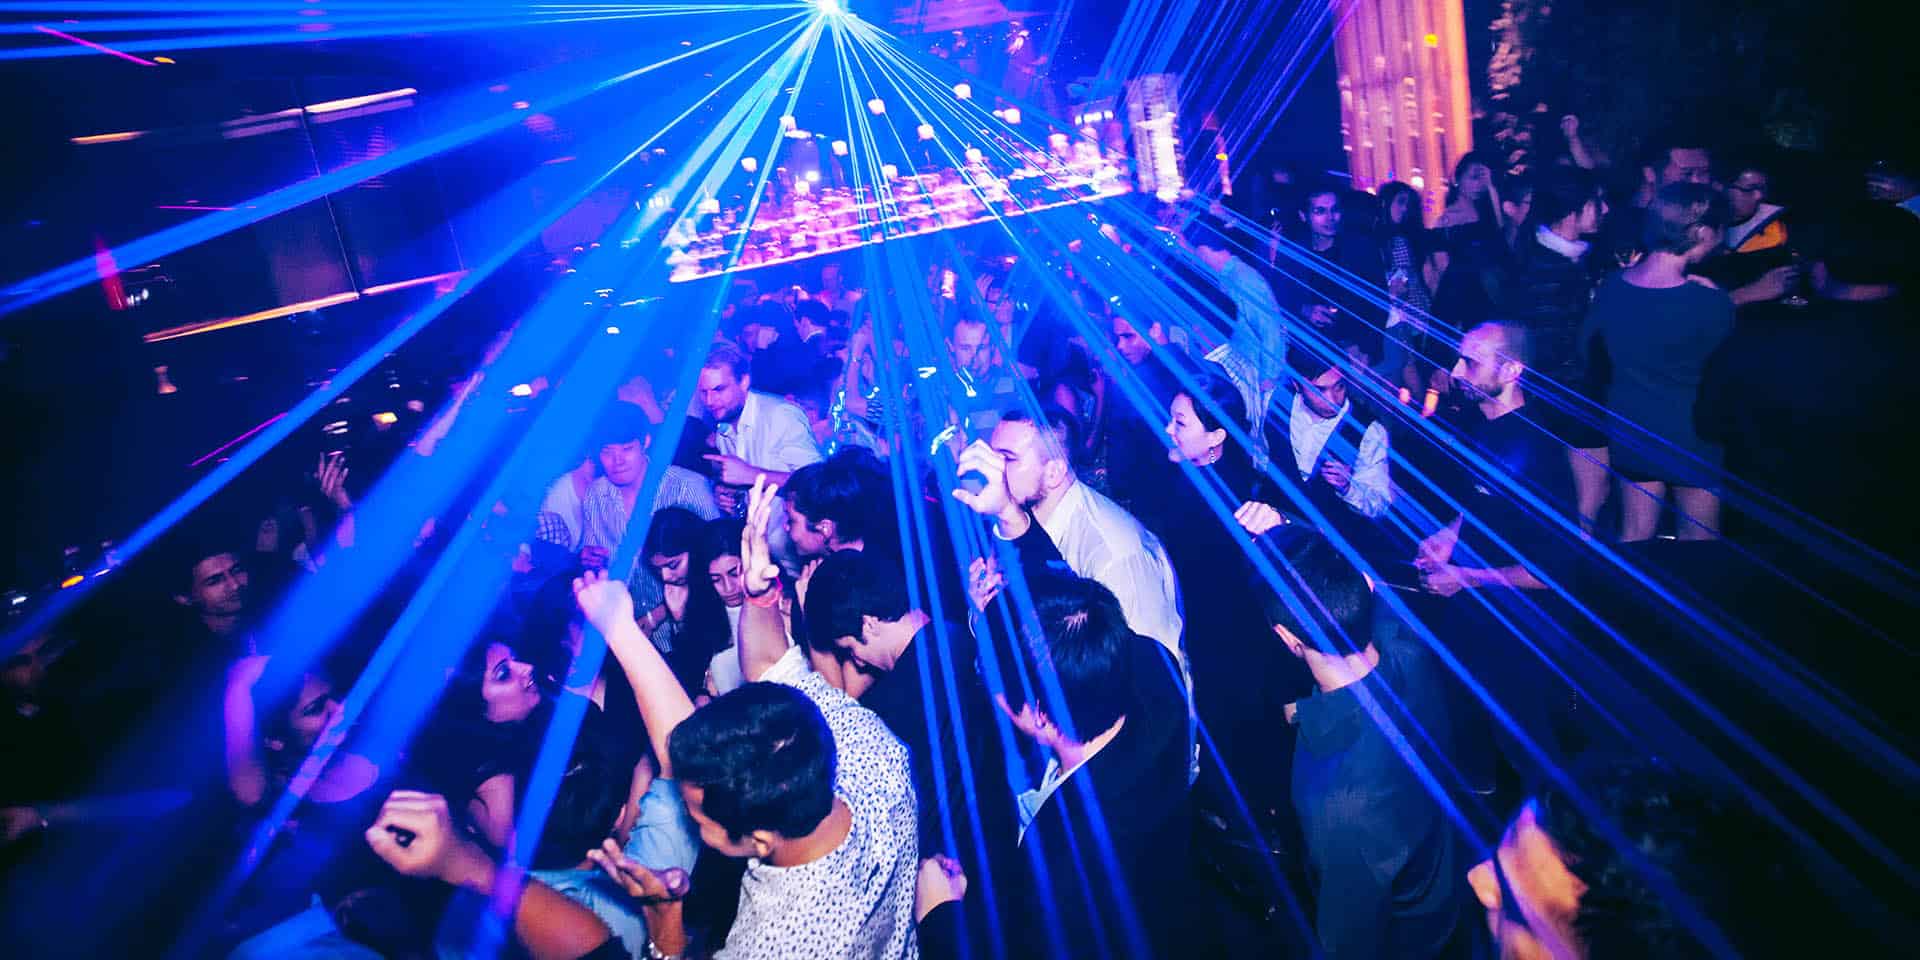 A crowded nightclub with people dancing and socializing under blue laser lights.